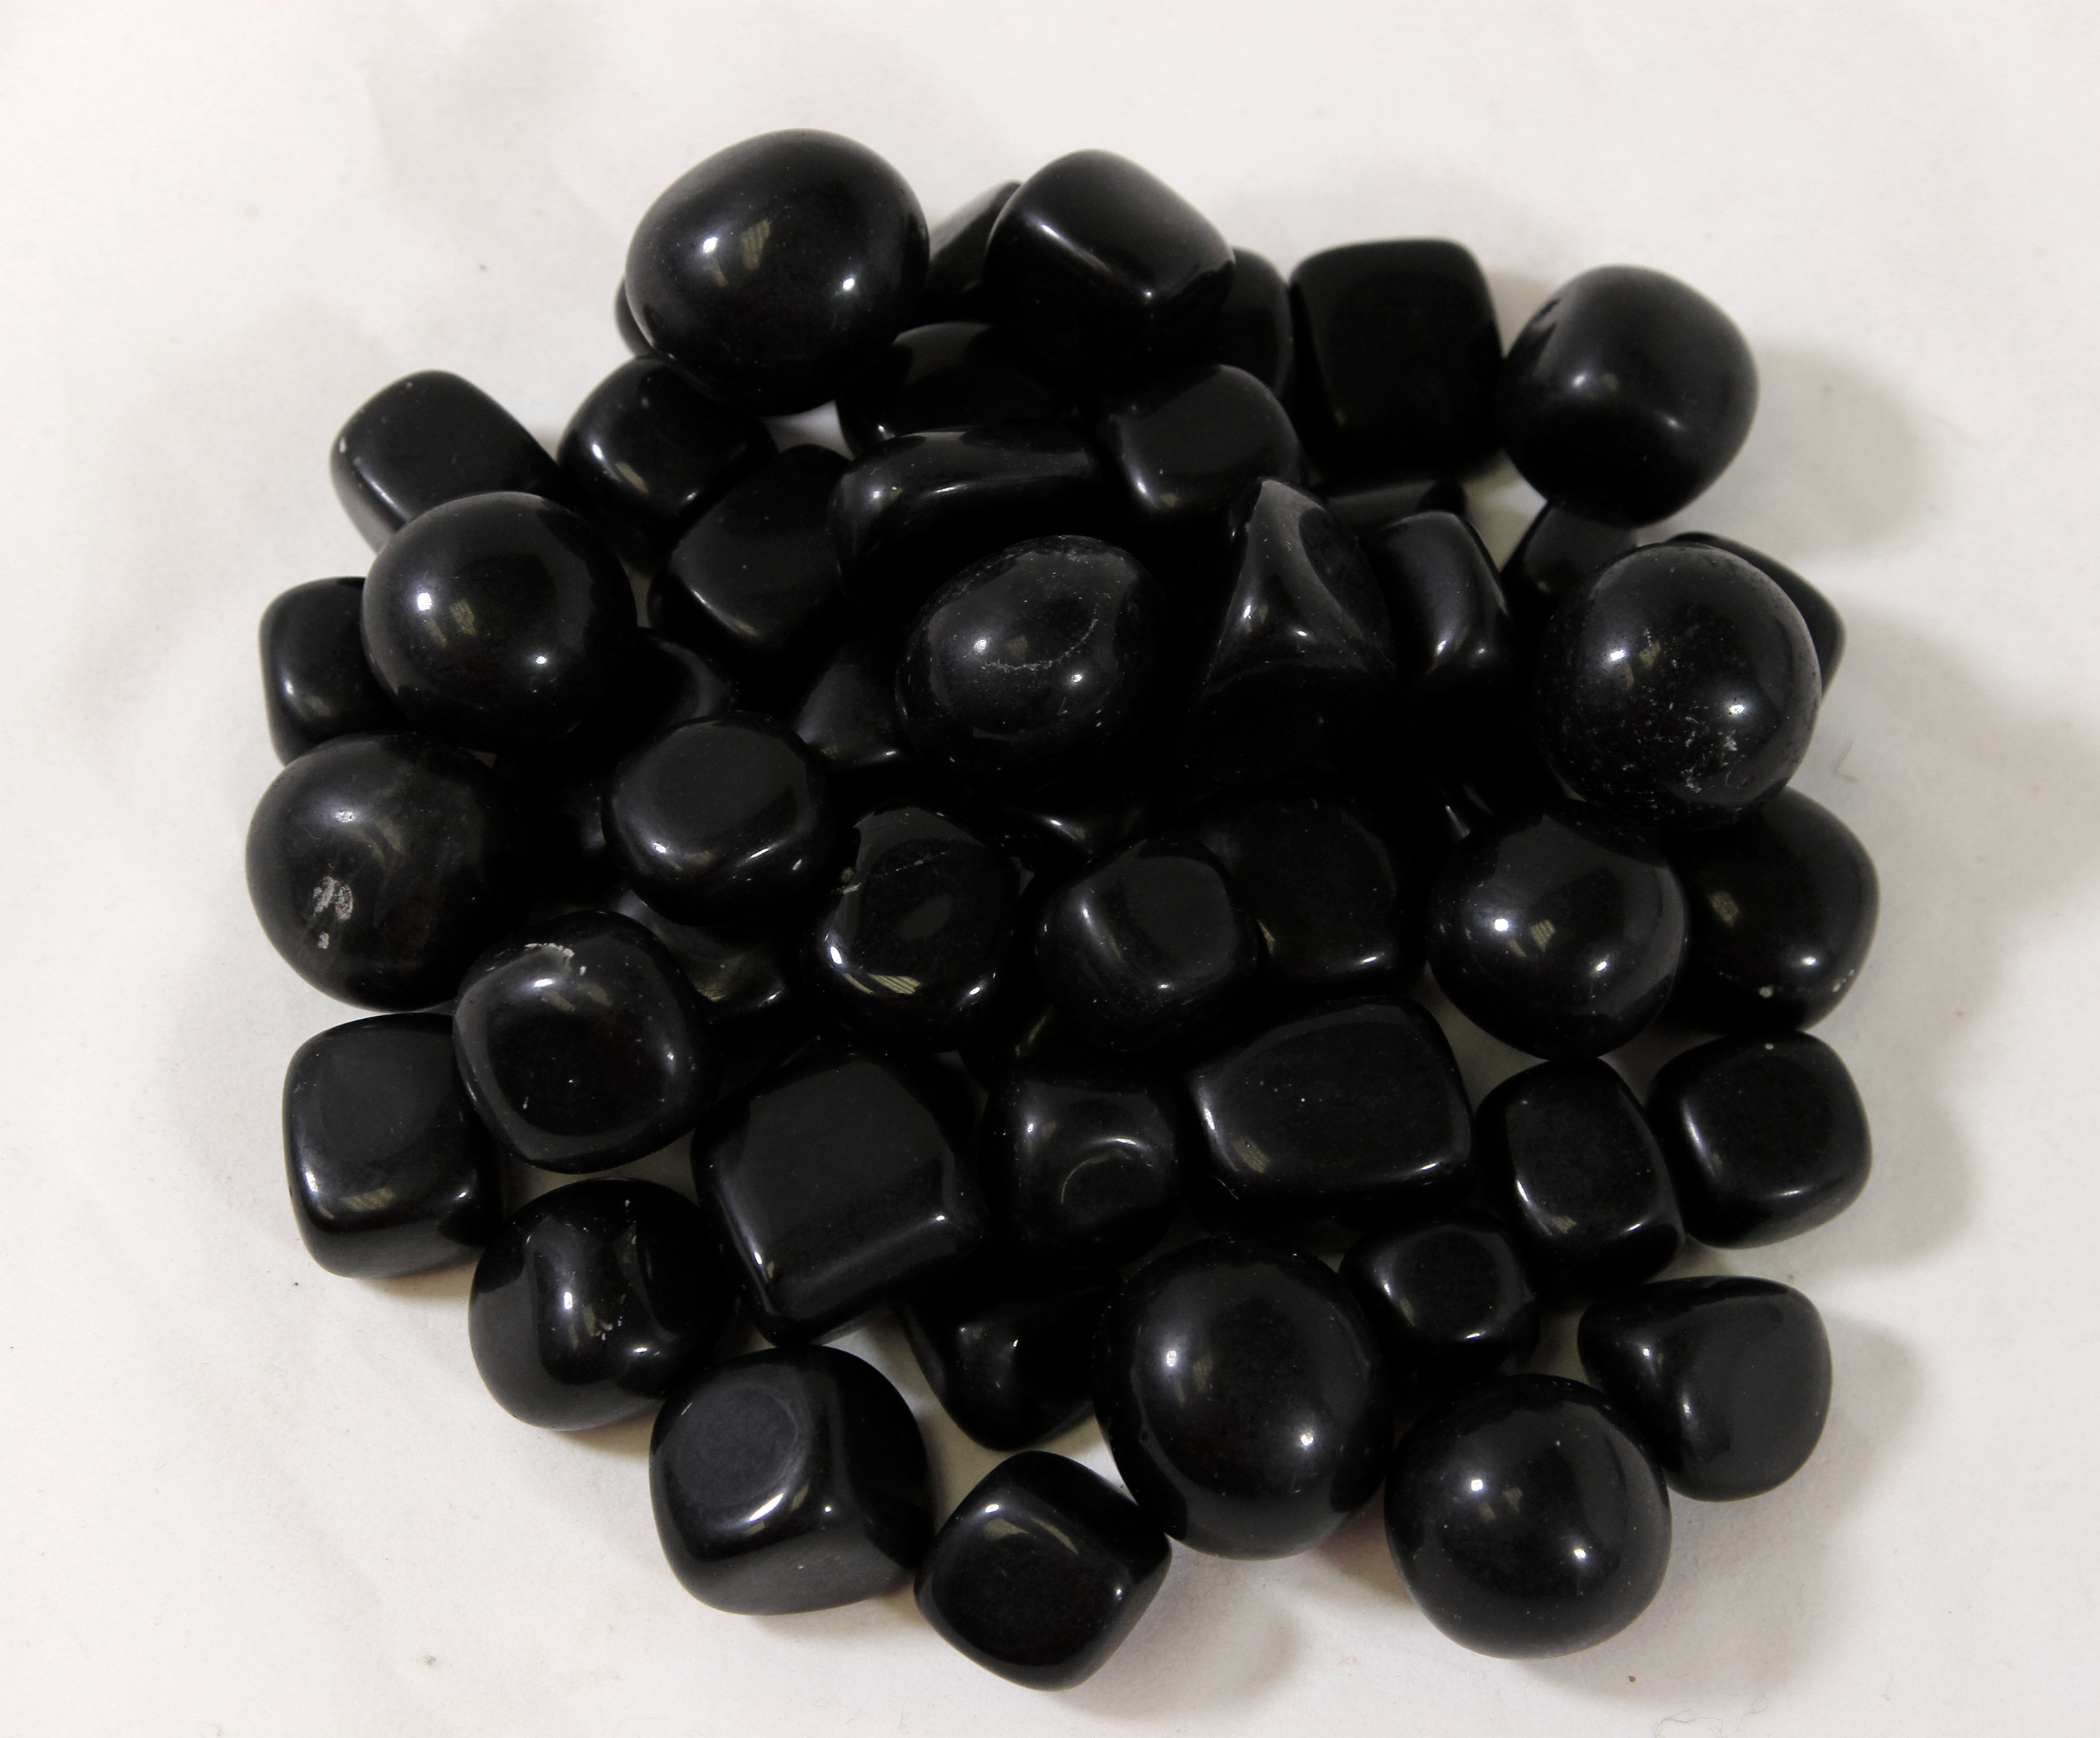 Pile of Small Tumbled Black Obsidian Stones